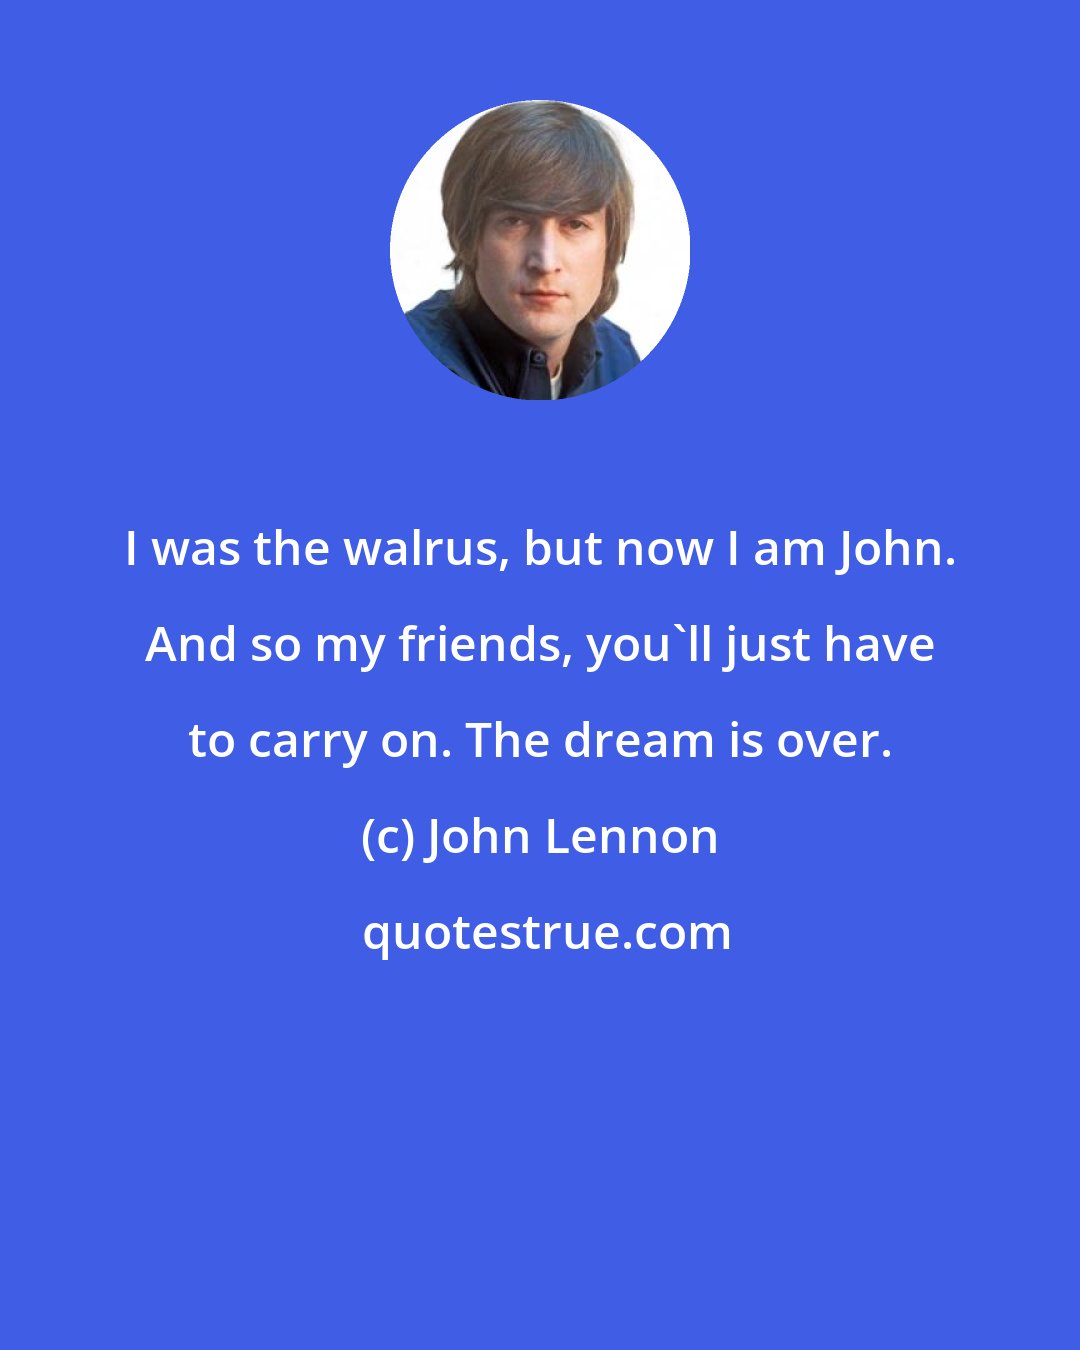 John Lennon: I was the walrus, but now I am John. And so my friends, you'll just have to carry on. The dream is over.